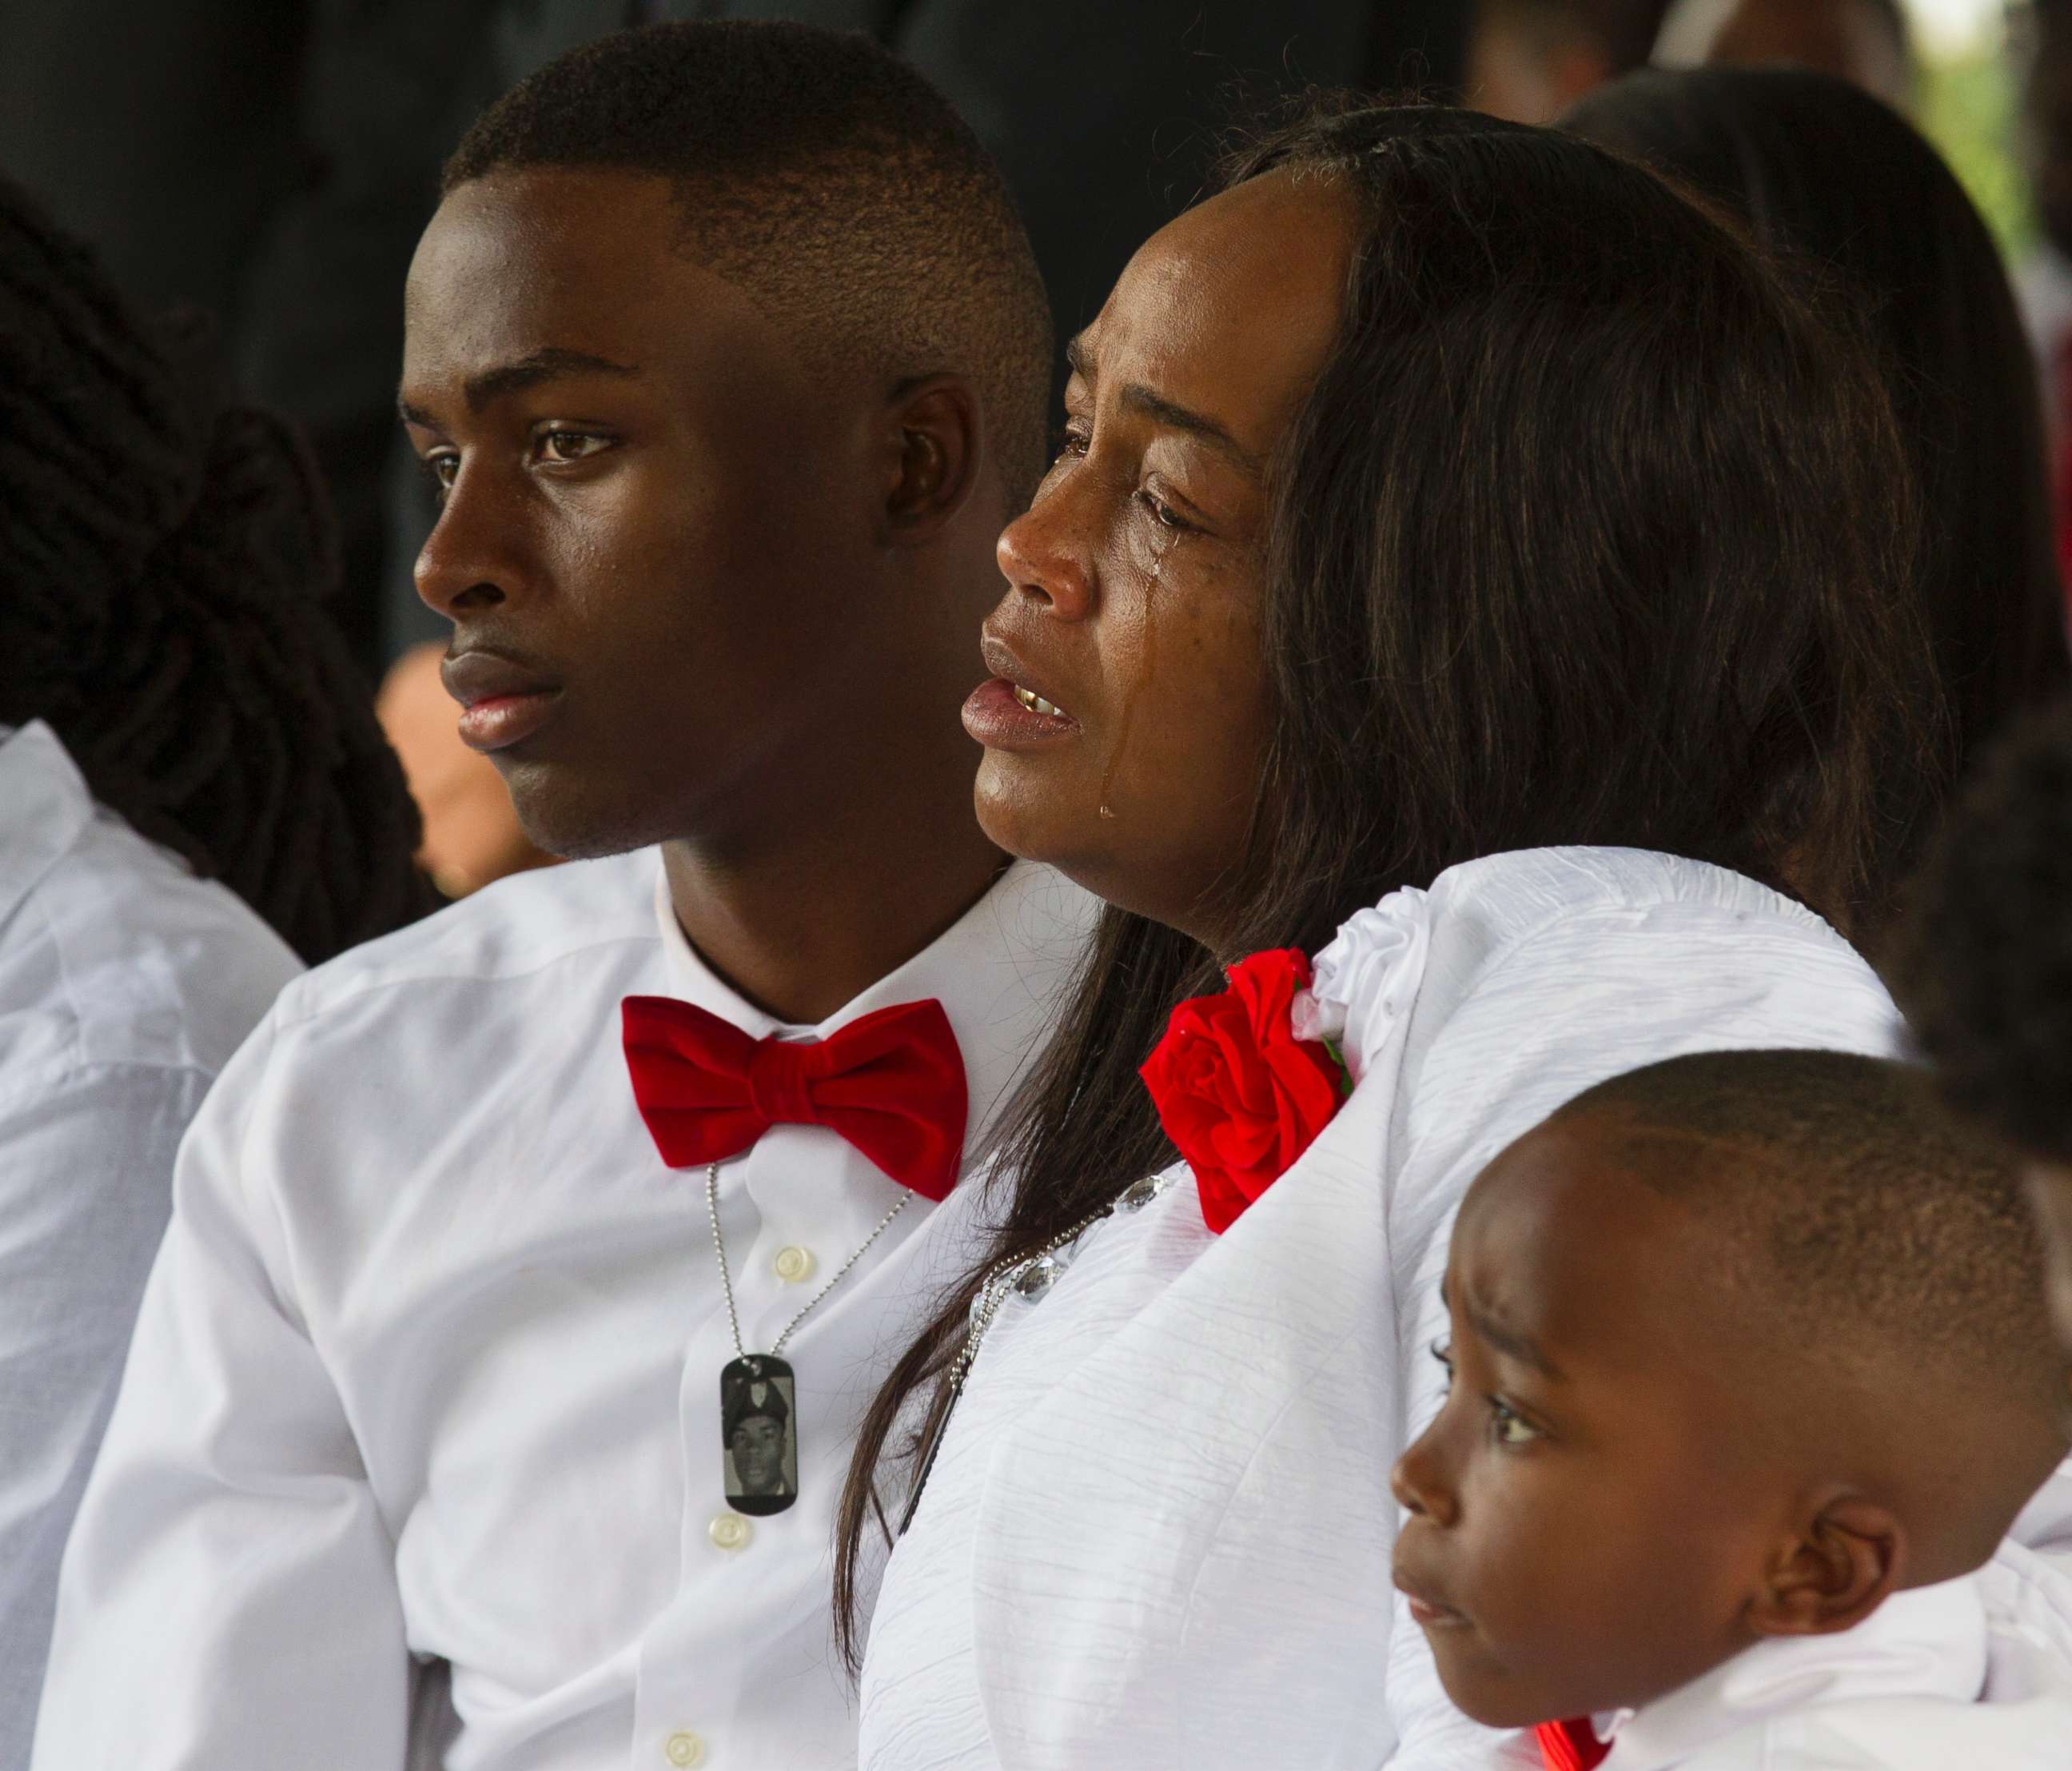 PHOTO: Cowanda Jones-Johnson, the mother of Sgt. La David Johnson, weeps during his burial service at Fred Hunter's Hollywood Memorial Gardens in Hollywood, Fla., on Oct. 21, 2017.